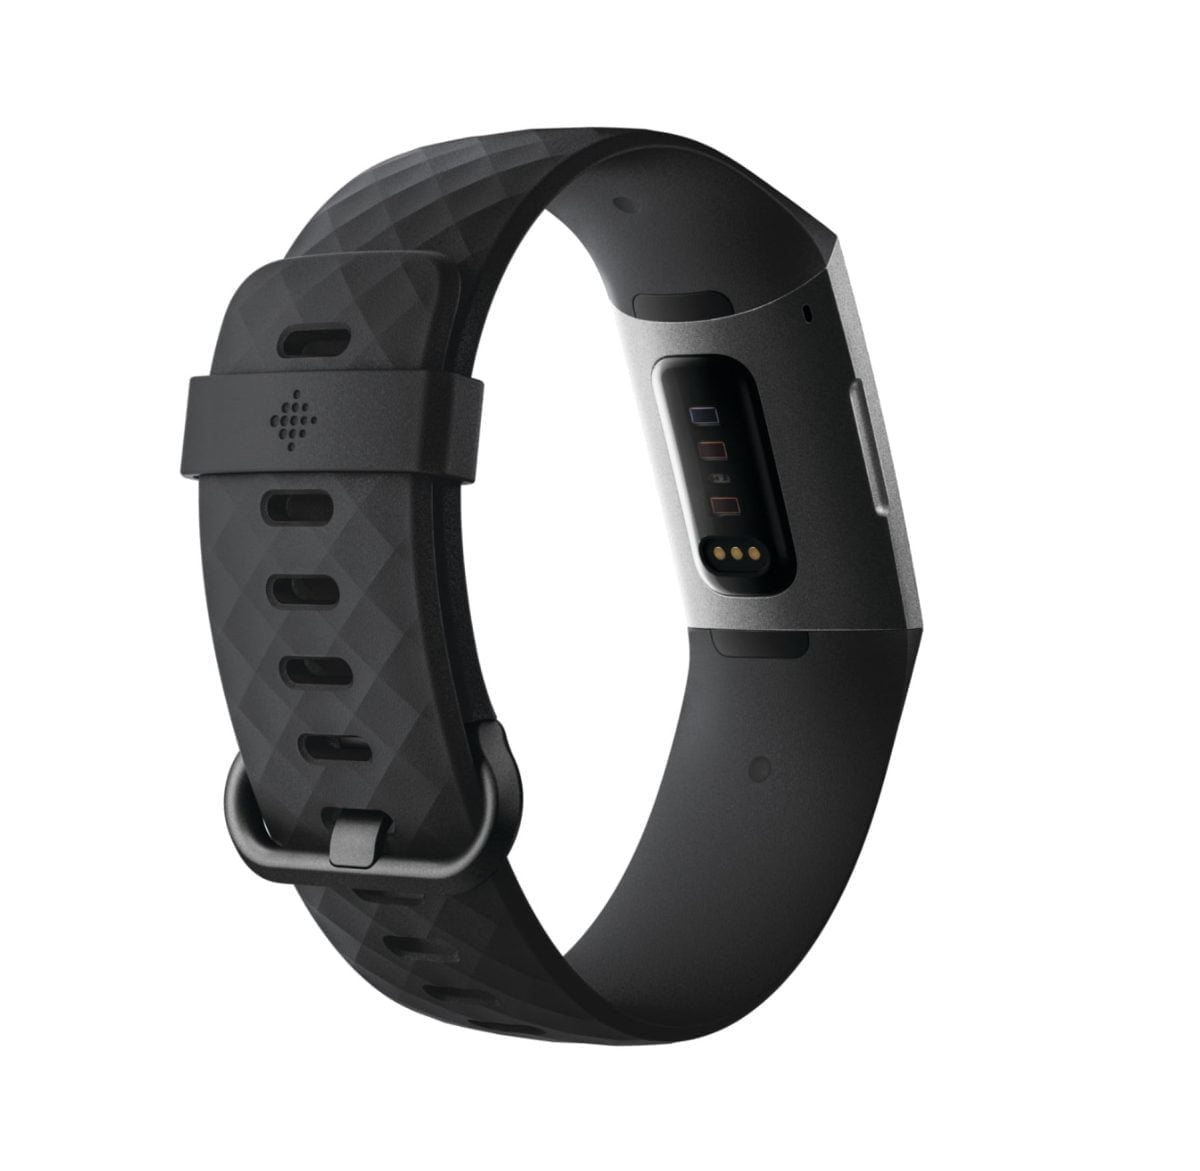 6288056 Bd Fitbit &Lt;H1&Gt;Fitbit - Charge 3 Activity Tracker - Black/Graphite&Lt;/H1&Gt; Https://Www.youtube.com/Watch?V=Omjhc4Iv4Z4 Get Better Rest With This Fitbit Charge 3 Fitness Tracker. It'S Water-Resistant Up To 50M, So You Can Monitor Swim Distance And Pace, And It Provides Access To Smartphone Apps For Receiving Event Notifications And Staying Up-To-Date. This Black Fitbit Charge 3 Fitness Tracker Feels Lightweight For All-Day Comfort. &Lt;Ul&Gt; &Lt;Li&Gt;24/7 Heart Rate&Lt;/Li&Gt; &Lt;Li&Gt; &Lt;P Class=&Quot;Calorie-Burn&Quot; Data-Tracking-Title=&Quot;All Day Calorie Burn&Quot;&Gt;All-Day Calorie Burn&Lt;/P&Gt; &Lt;/Li&Gt; &Lt;Li&Gt; &Lt;P Class=&Quot;Cardio-Levels-Bar&Quot; Data-Tracking-Title=&Quot;Real-Time Heart Rate Zones&Quot;&Gt;Real-Time Heart Rate Zones&Lt;/P&Gt; &Lt;/Li&Gt; &Lt;Li&Gt; &Lt;P Class=&Quot;Sleep&Quot; Data-Tracking-Title=&Quot;Auto Sleep Tracking&Quot;&Gt;Auto Sleep Tracking&Lt;/P&Gt; &Lt;/Li&Gt; &Lt;Li&Gt; &Lt;P Class=&Quot;Female-Health&Quot; Data-Tracking-Title=&Quot;Female Health Tracking&Quot;&Gt;Female Health Tracking&Lt;/P&Gt; &Lt;/Li&Gt; &Lt;Li&Gt; &Lt;P Class=&Quot;Dashboard&Quot; Data-Tracking-Title=&Quot;Fitbit App Dashboard&Quot;&Gt;Fitbit App Dashboard&Lt;/P&Gt; &Lt;/Li&Gt; &Lt;/Ul&Gt; Accessories Included: Small &Amp; Large Bands, Charge Cable Fitbit Charge 3 Fitbit Charge 3 Activity Tracker - Black/Graphite